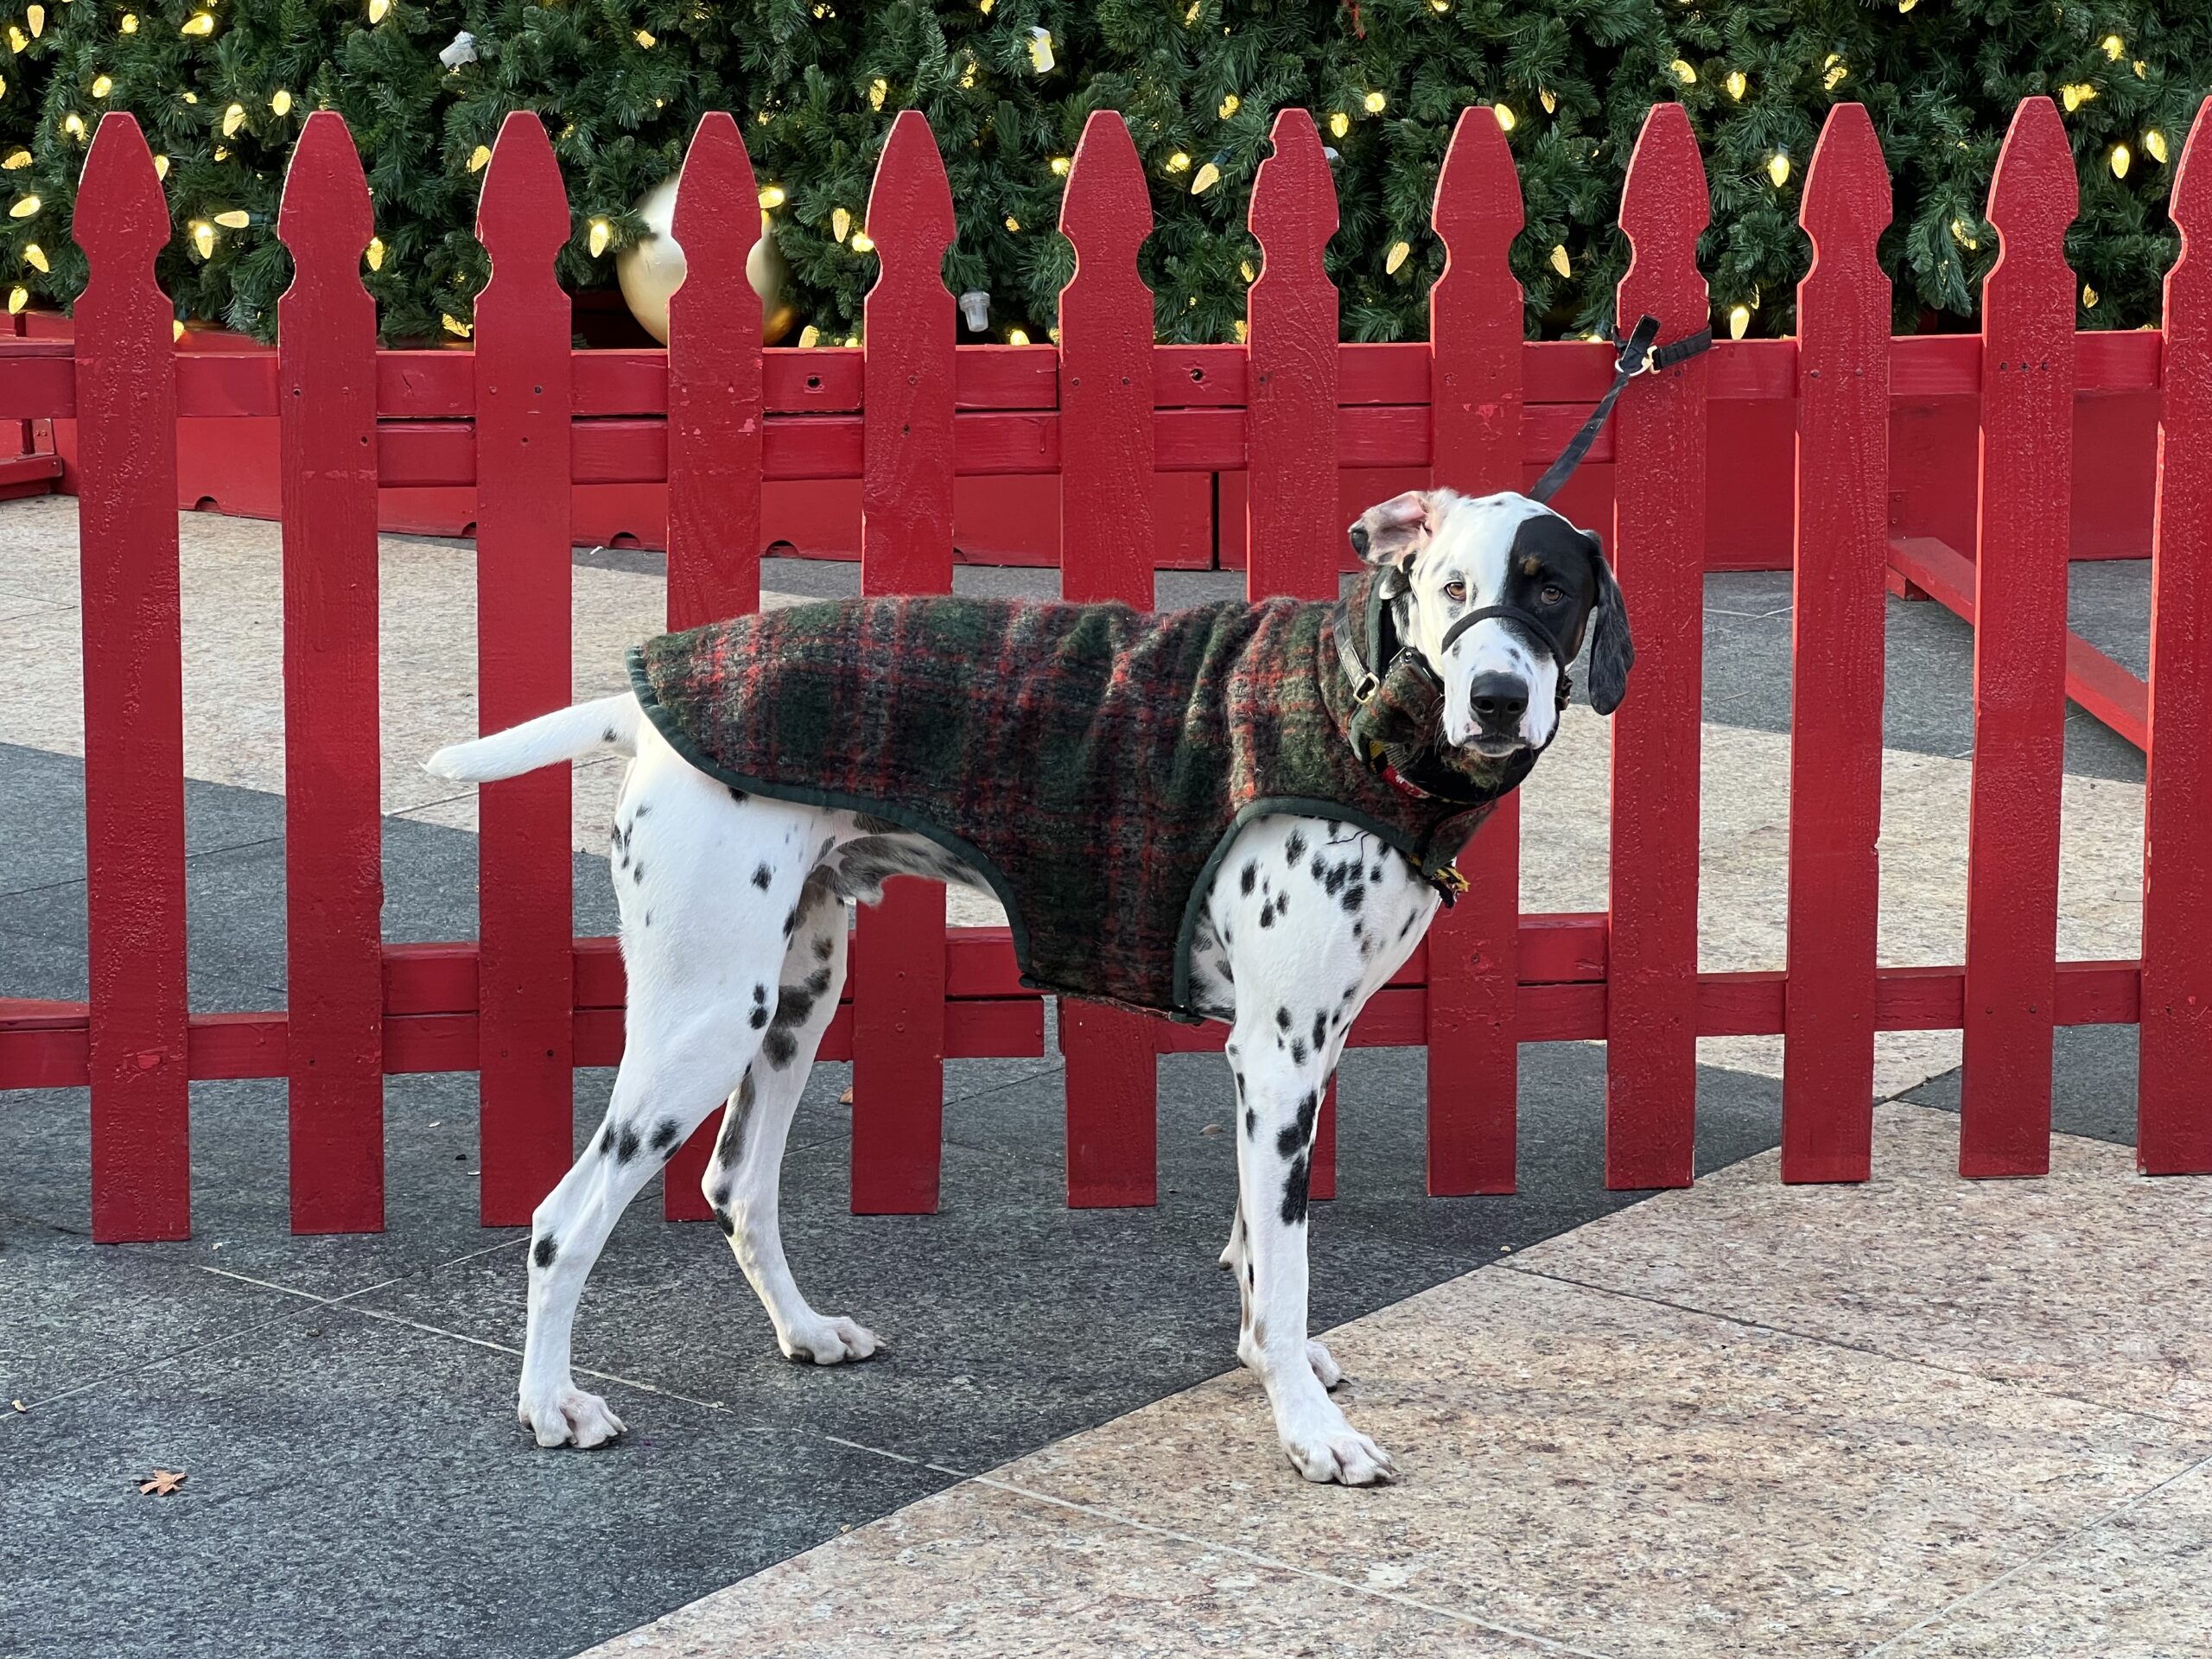 Dalmatian Great Dane Mix Tied To Red Picket Fence